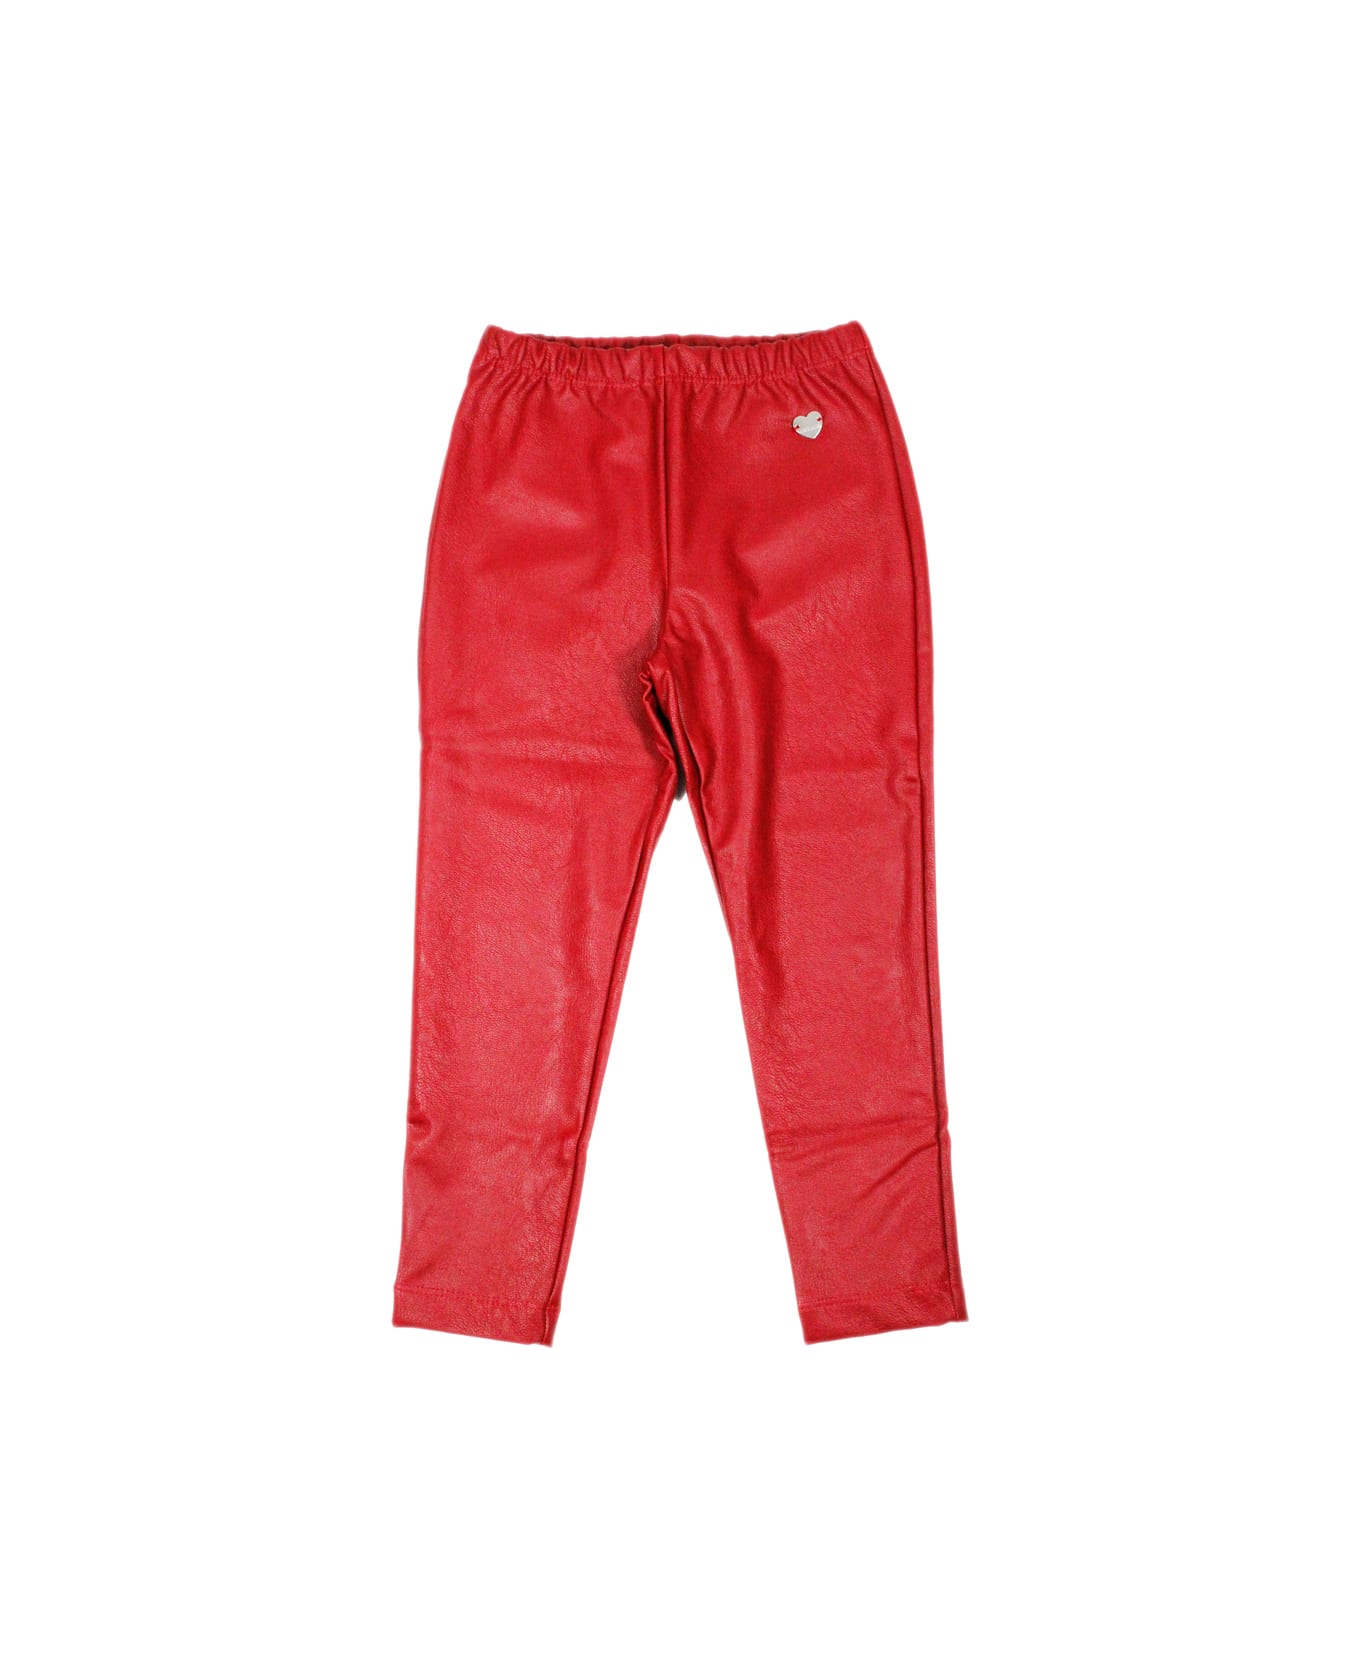 Monnalisa Leggings Trousers In Super Stretch Eco-leather With Applied Metal Heart - Red